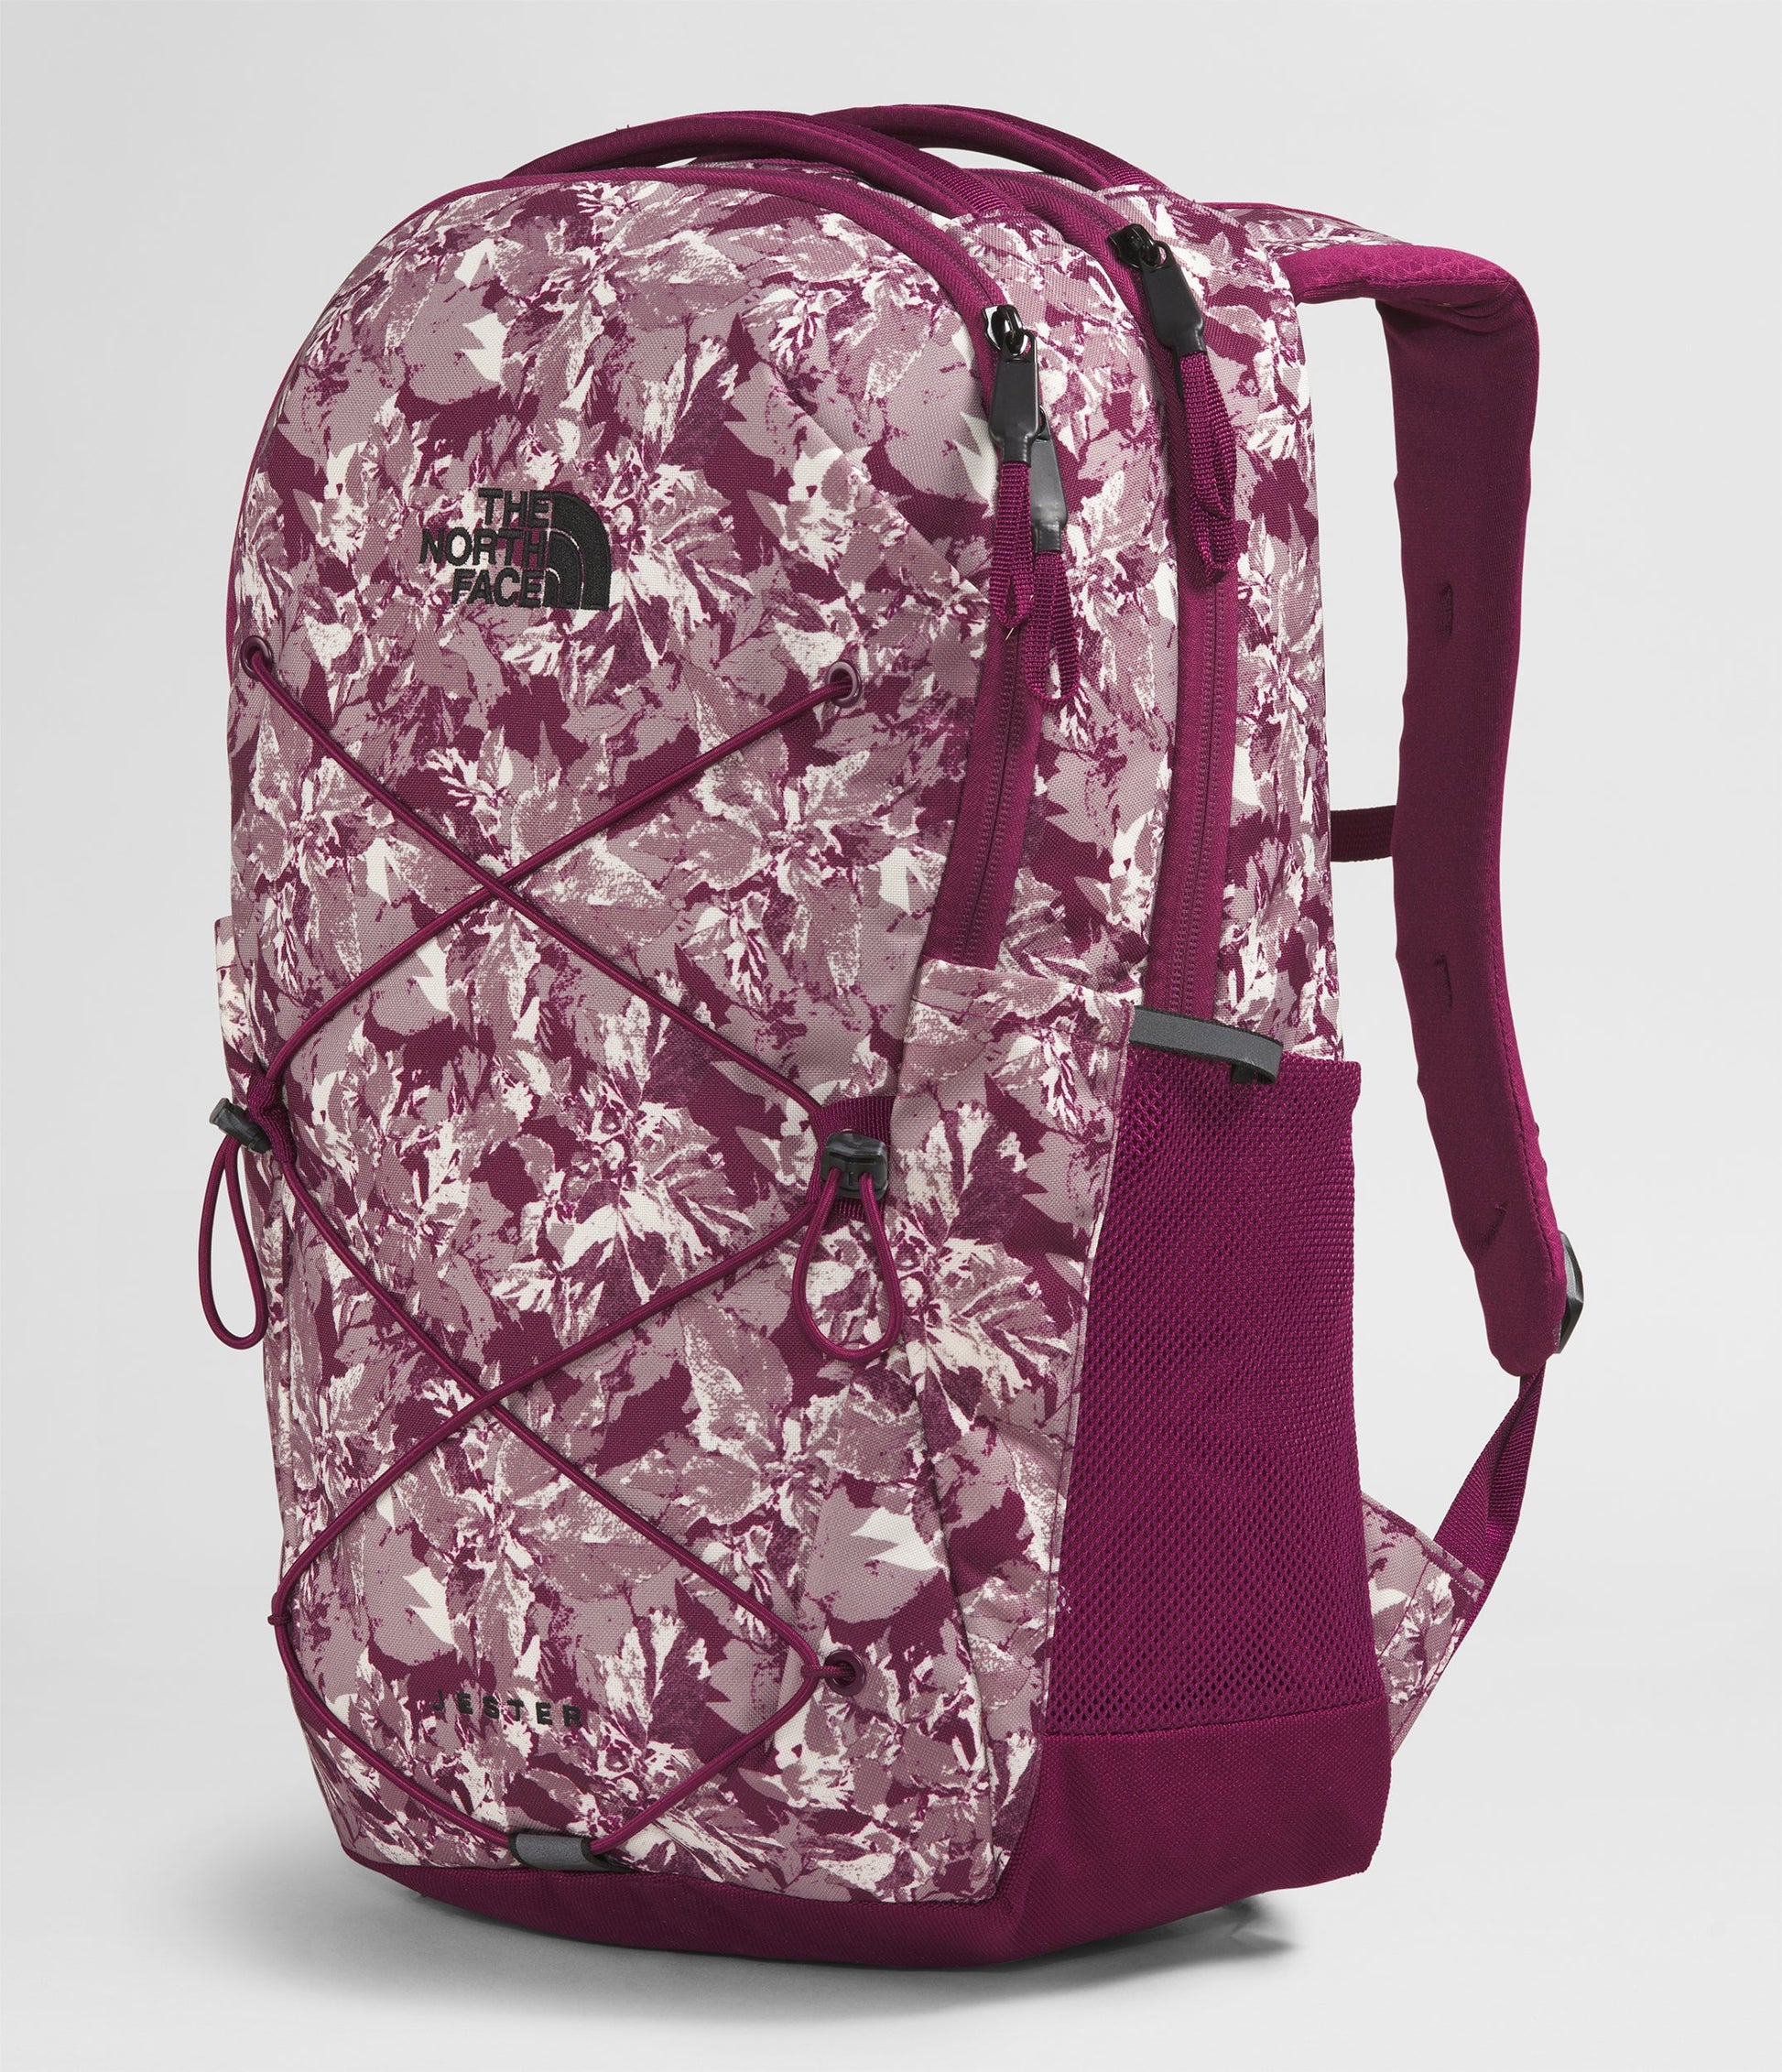 The North Face Women’s Jester Backpack - Boysenberry Coleus Camo Print